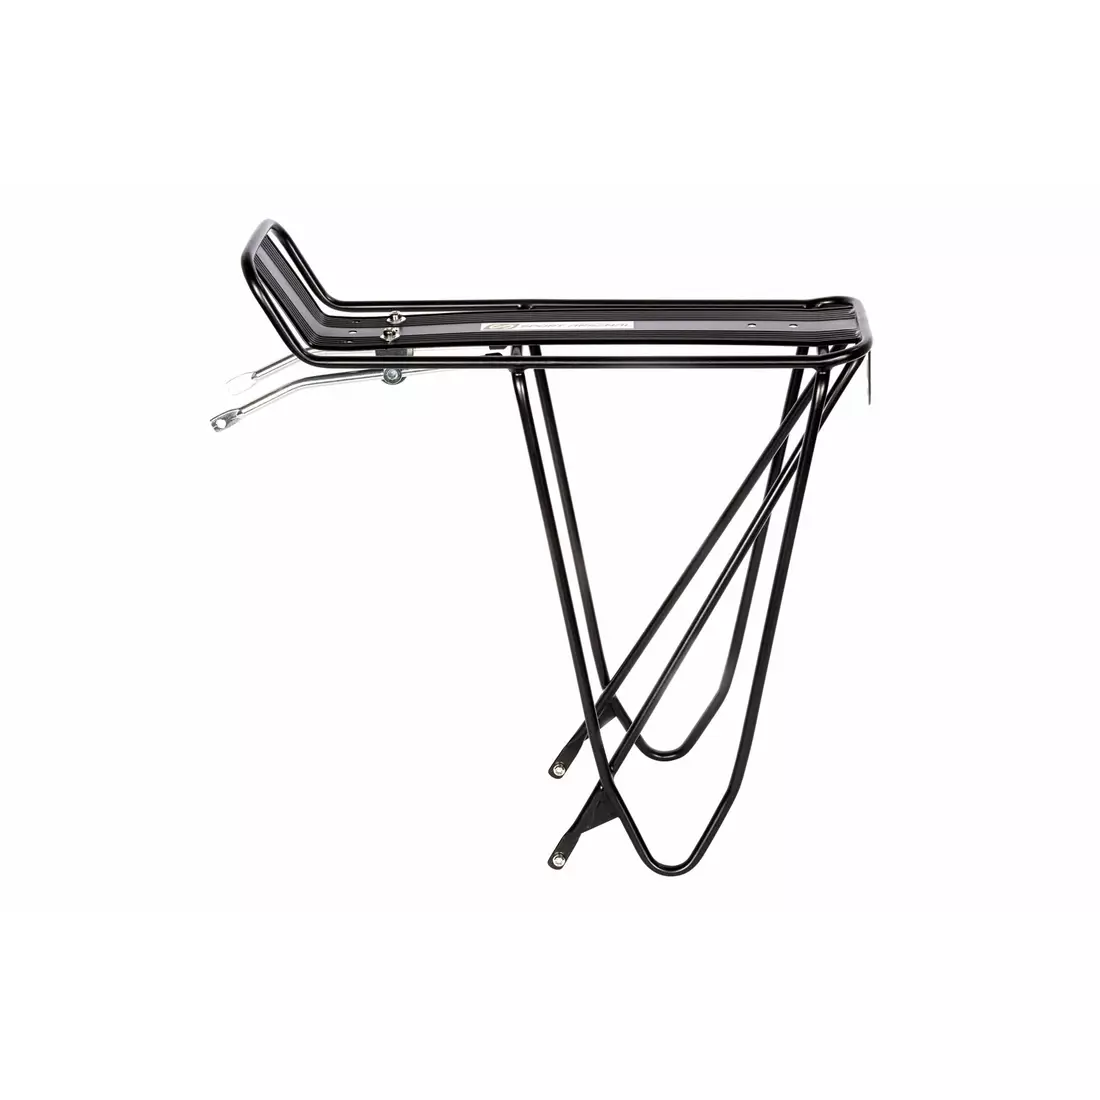 SPORT ARSENAL 001 Rear expedition rack, steel